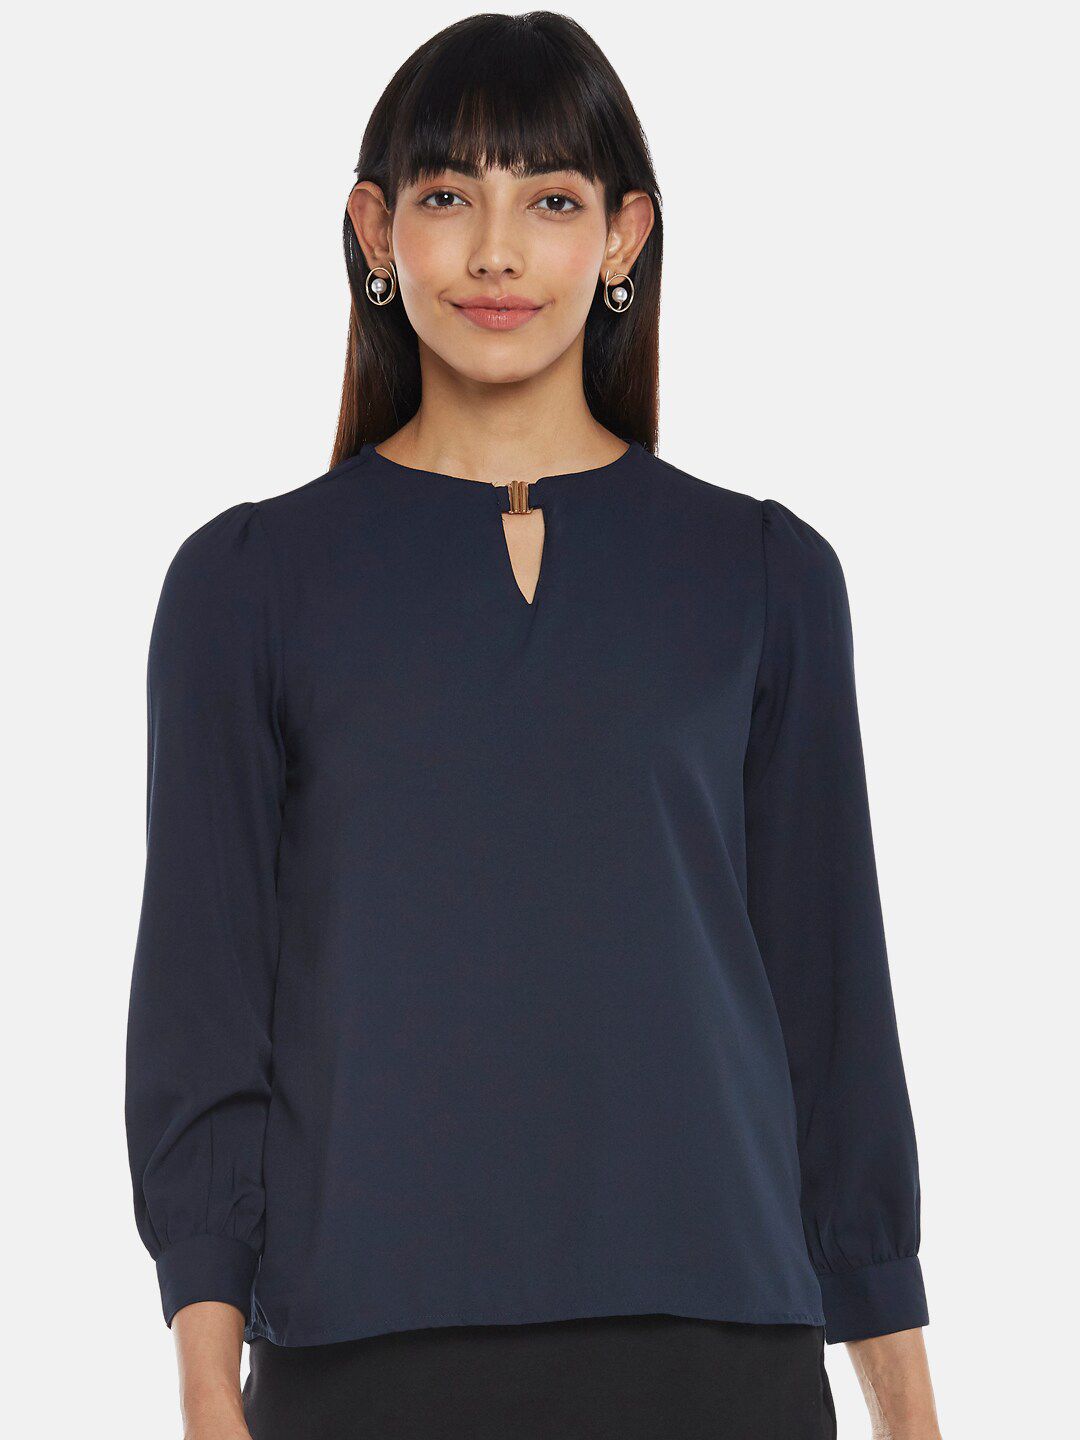 Annabelle by Pantaloons Navy Blue Keyhole Neck Top Price in India